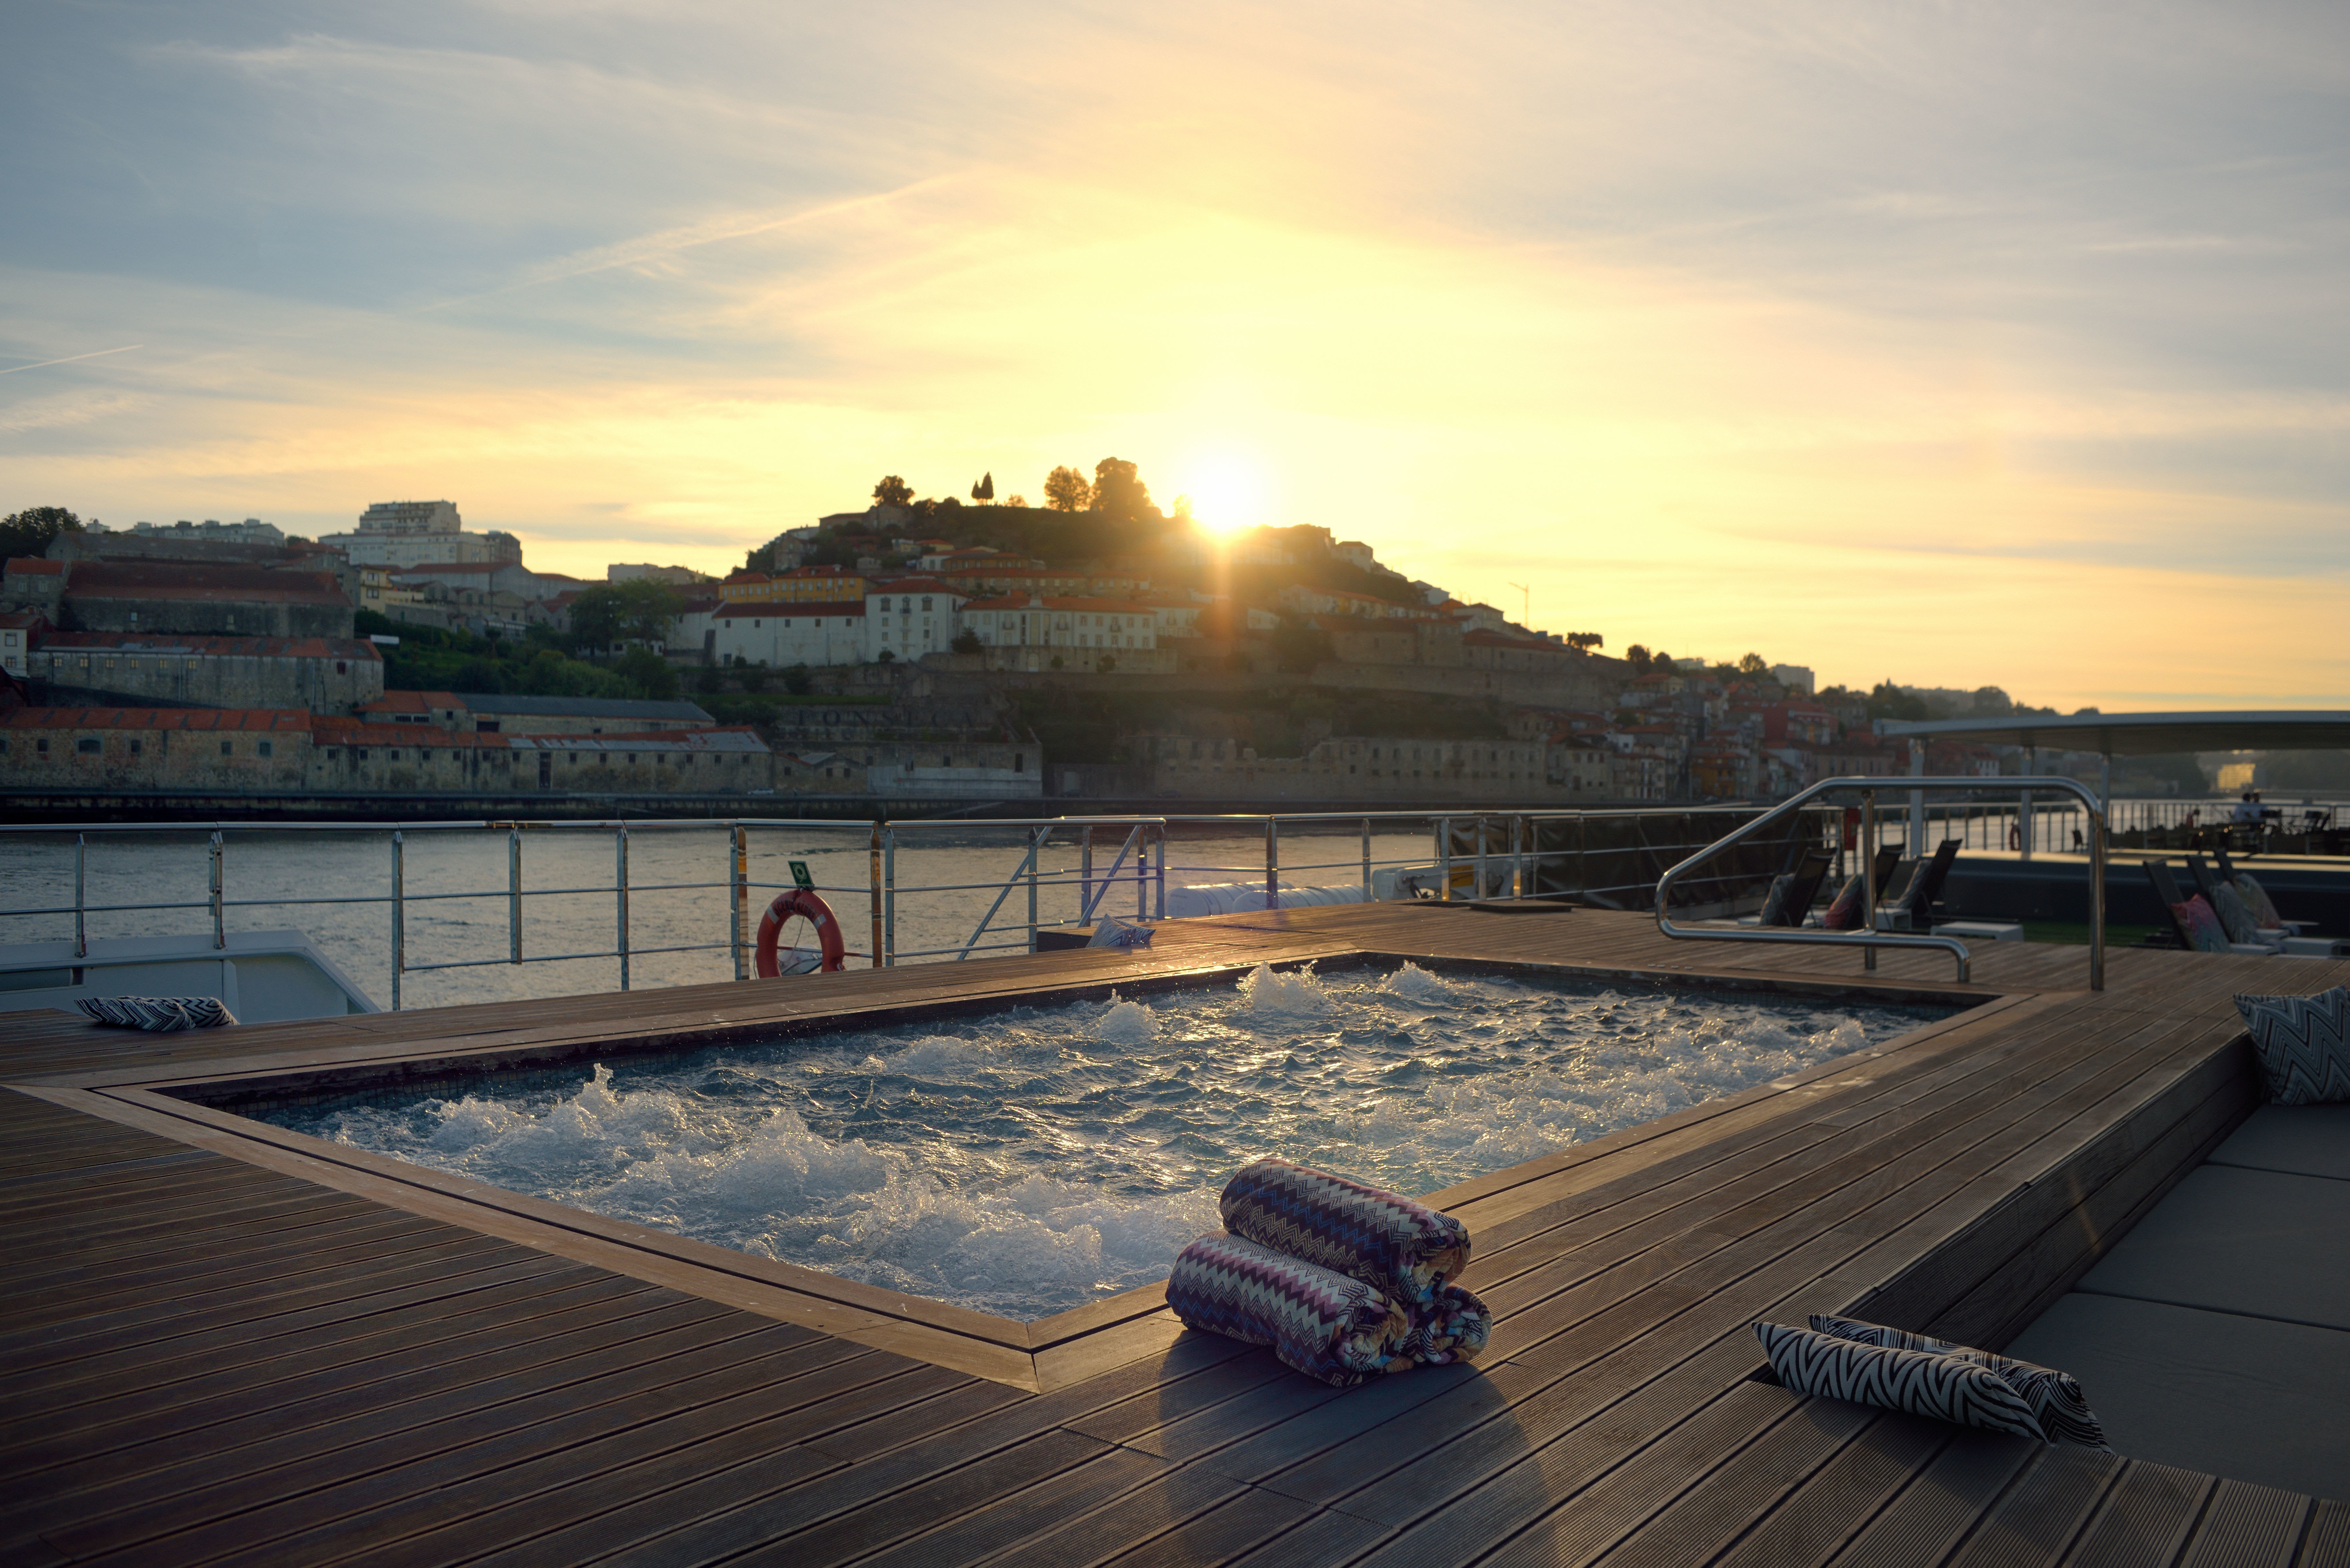 An outdoor pool located on the sun-drenched top deck of the Scenic Azure cruise ship, providing a view of the Douro River in Portugal. 